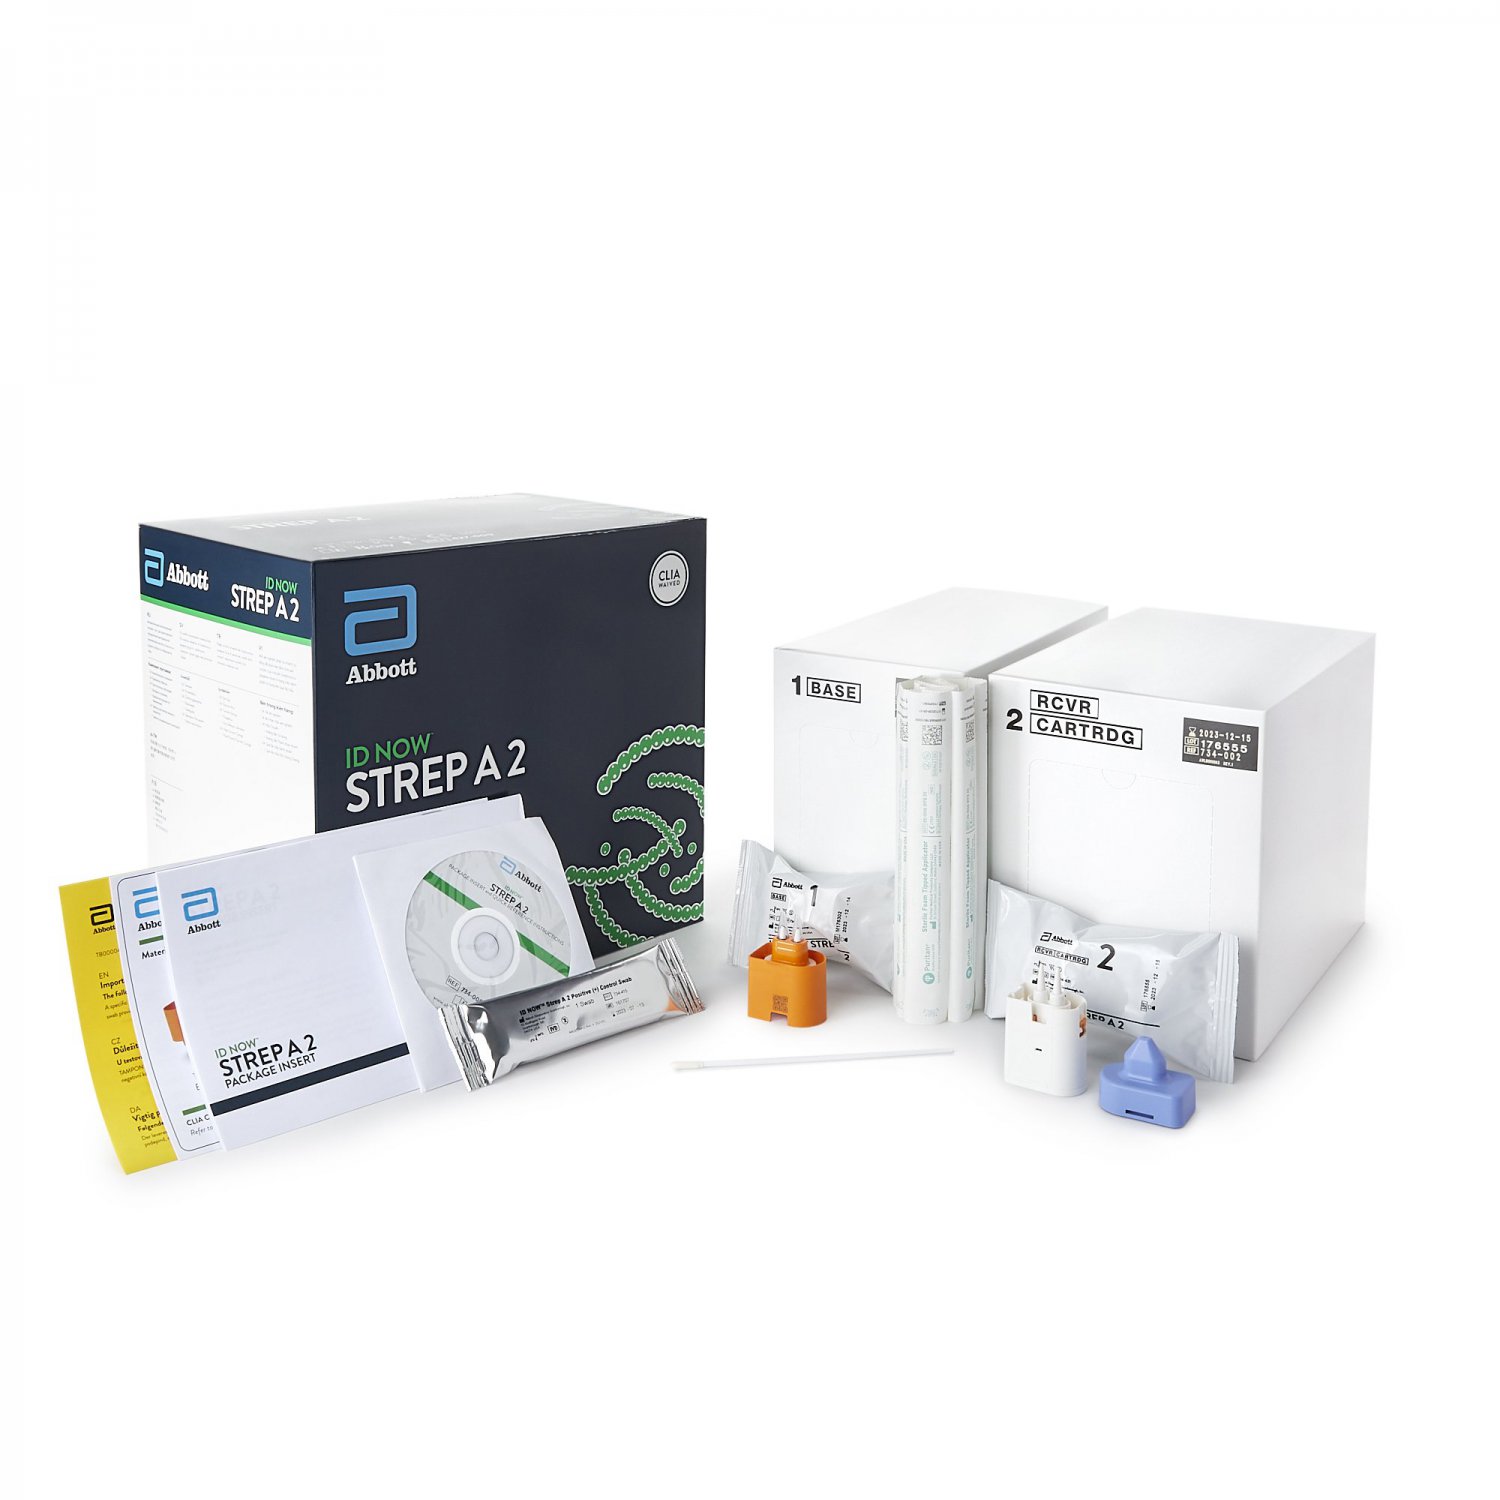 Respiratory Test Kit ID NOWâ�¢ Strep A 2.0 Molecular Diagnostic 24 Tests CLIA Waived